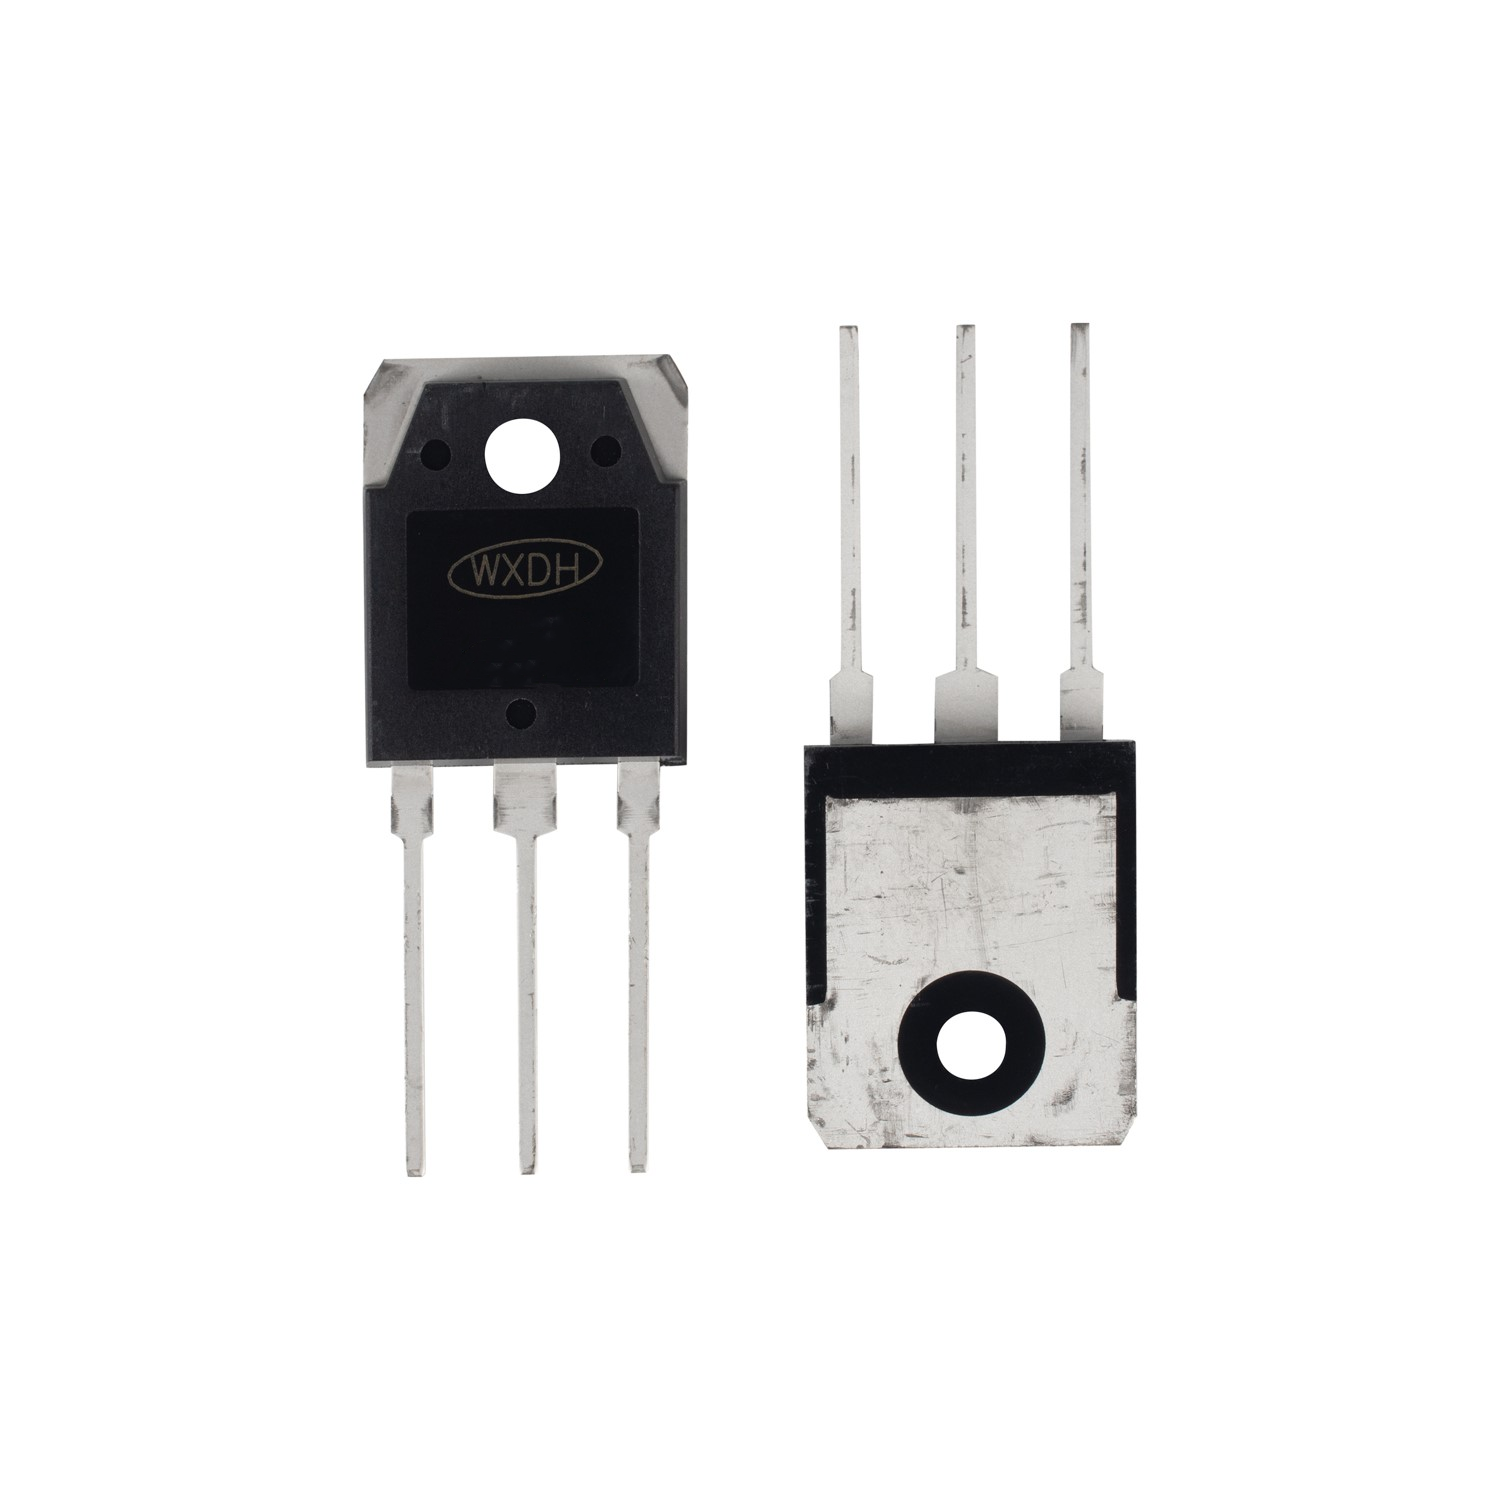 60A 300V Fast recovery diode MUR6030DCT